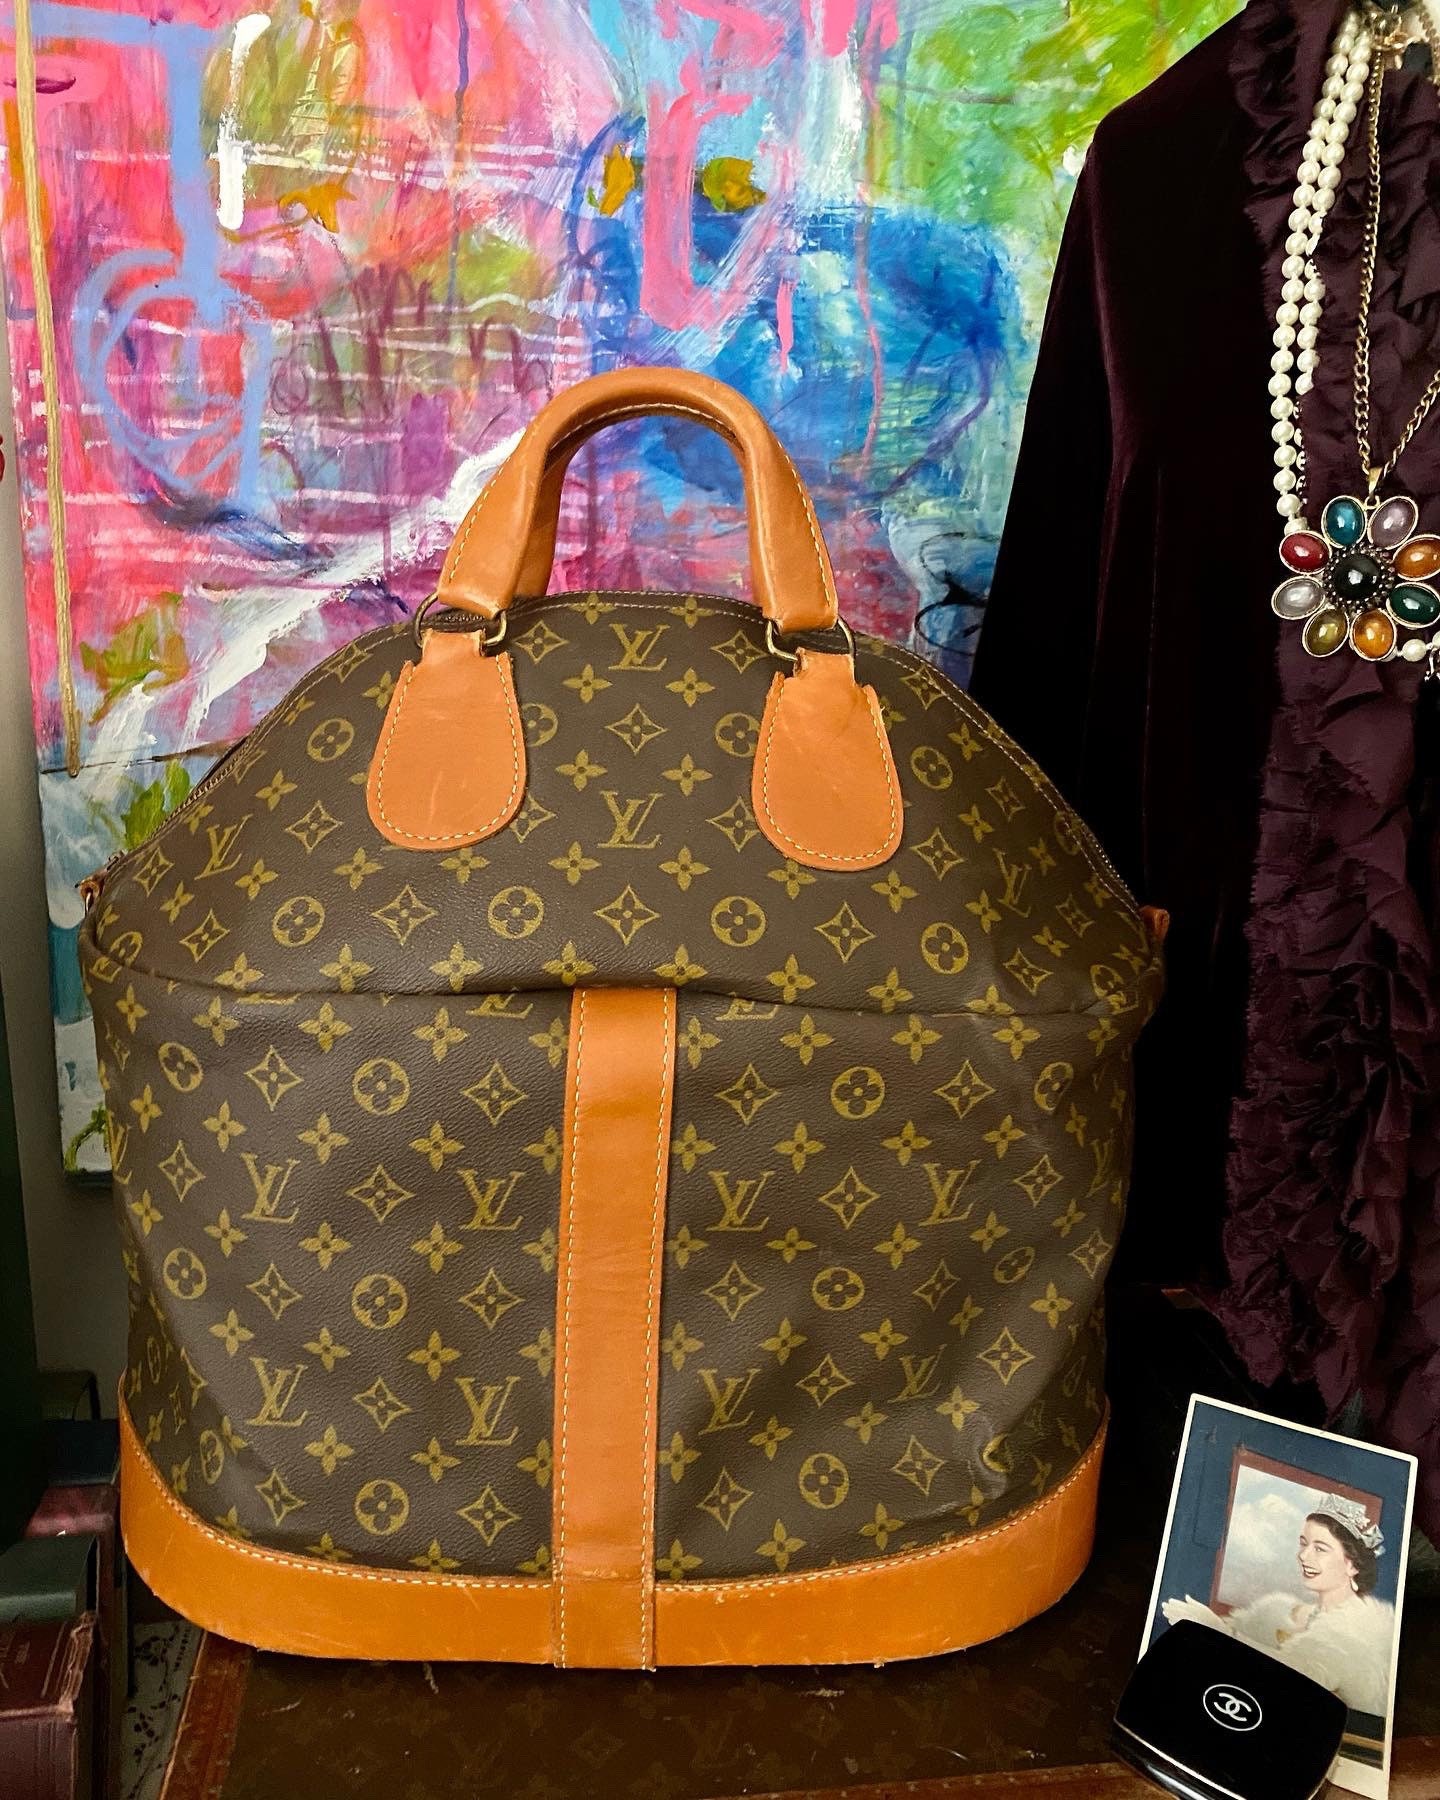 Lot - Louis Vuitton Extra Large Monogram Steamer Travel bag. France 1980's.  Scuffs to leather base and monogrammed bag, small split to bag. No pad  lock. Bag Height 22.75, bottom size 25.375 x 10.75 in